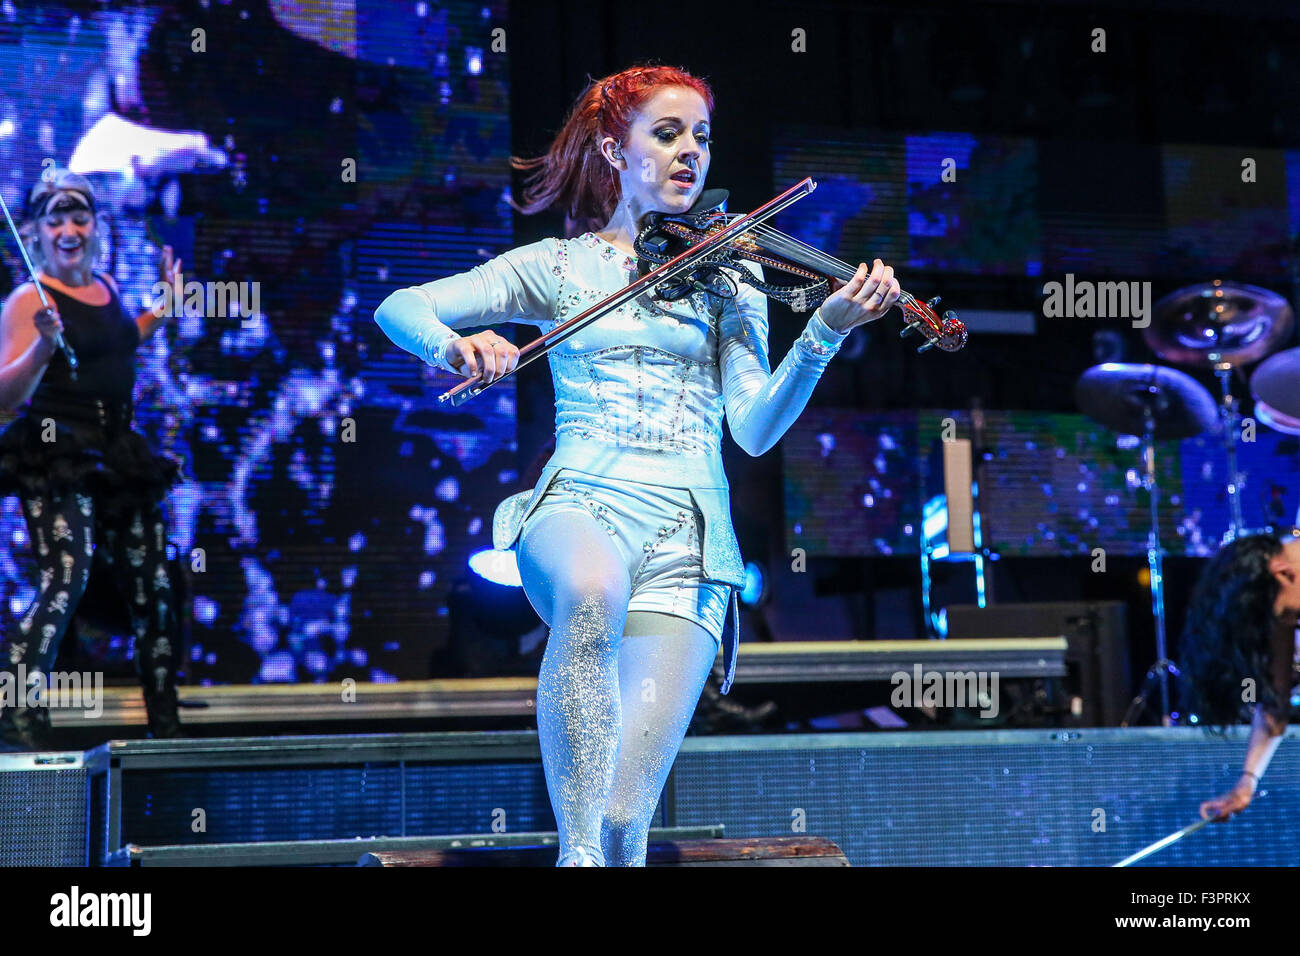 Music Artist LINDSEY STIRLING performs at the Red Hat Amphitheater in North Carolina.  Lindsey Stirling (born September 21, 1986) is an American violinist, dancer, performance artist, and composer. She presents choreographed violin performances, both live and in music videos found on her YouTube channel, Lindsey Stirling, which she introduced in 2007. Stock Photo